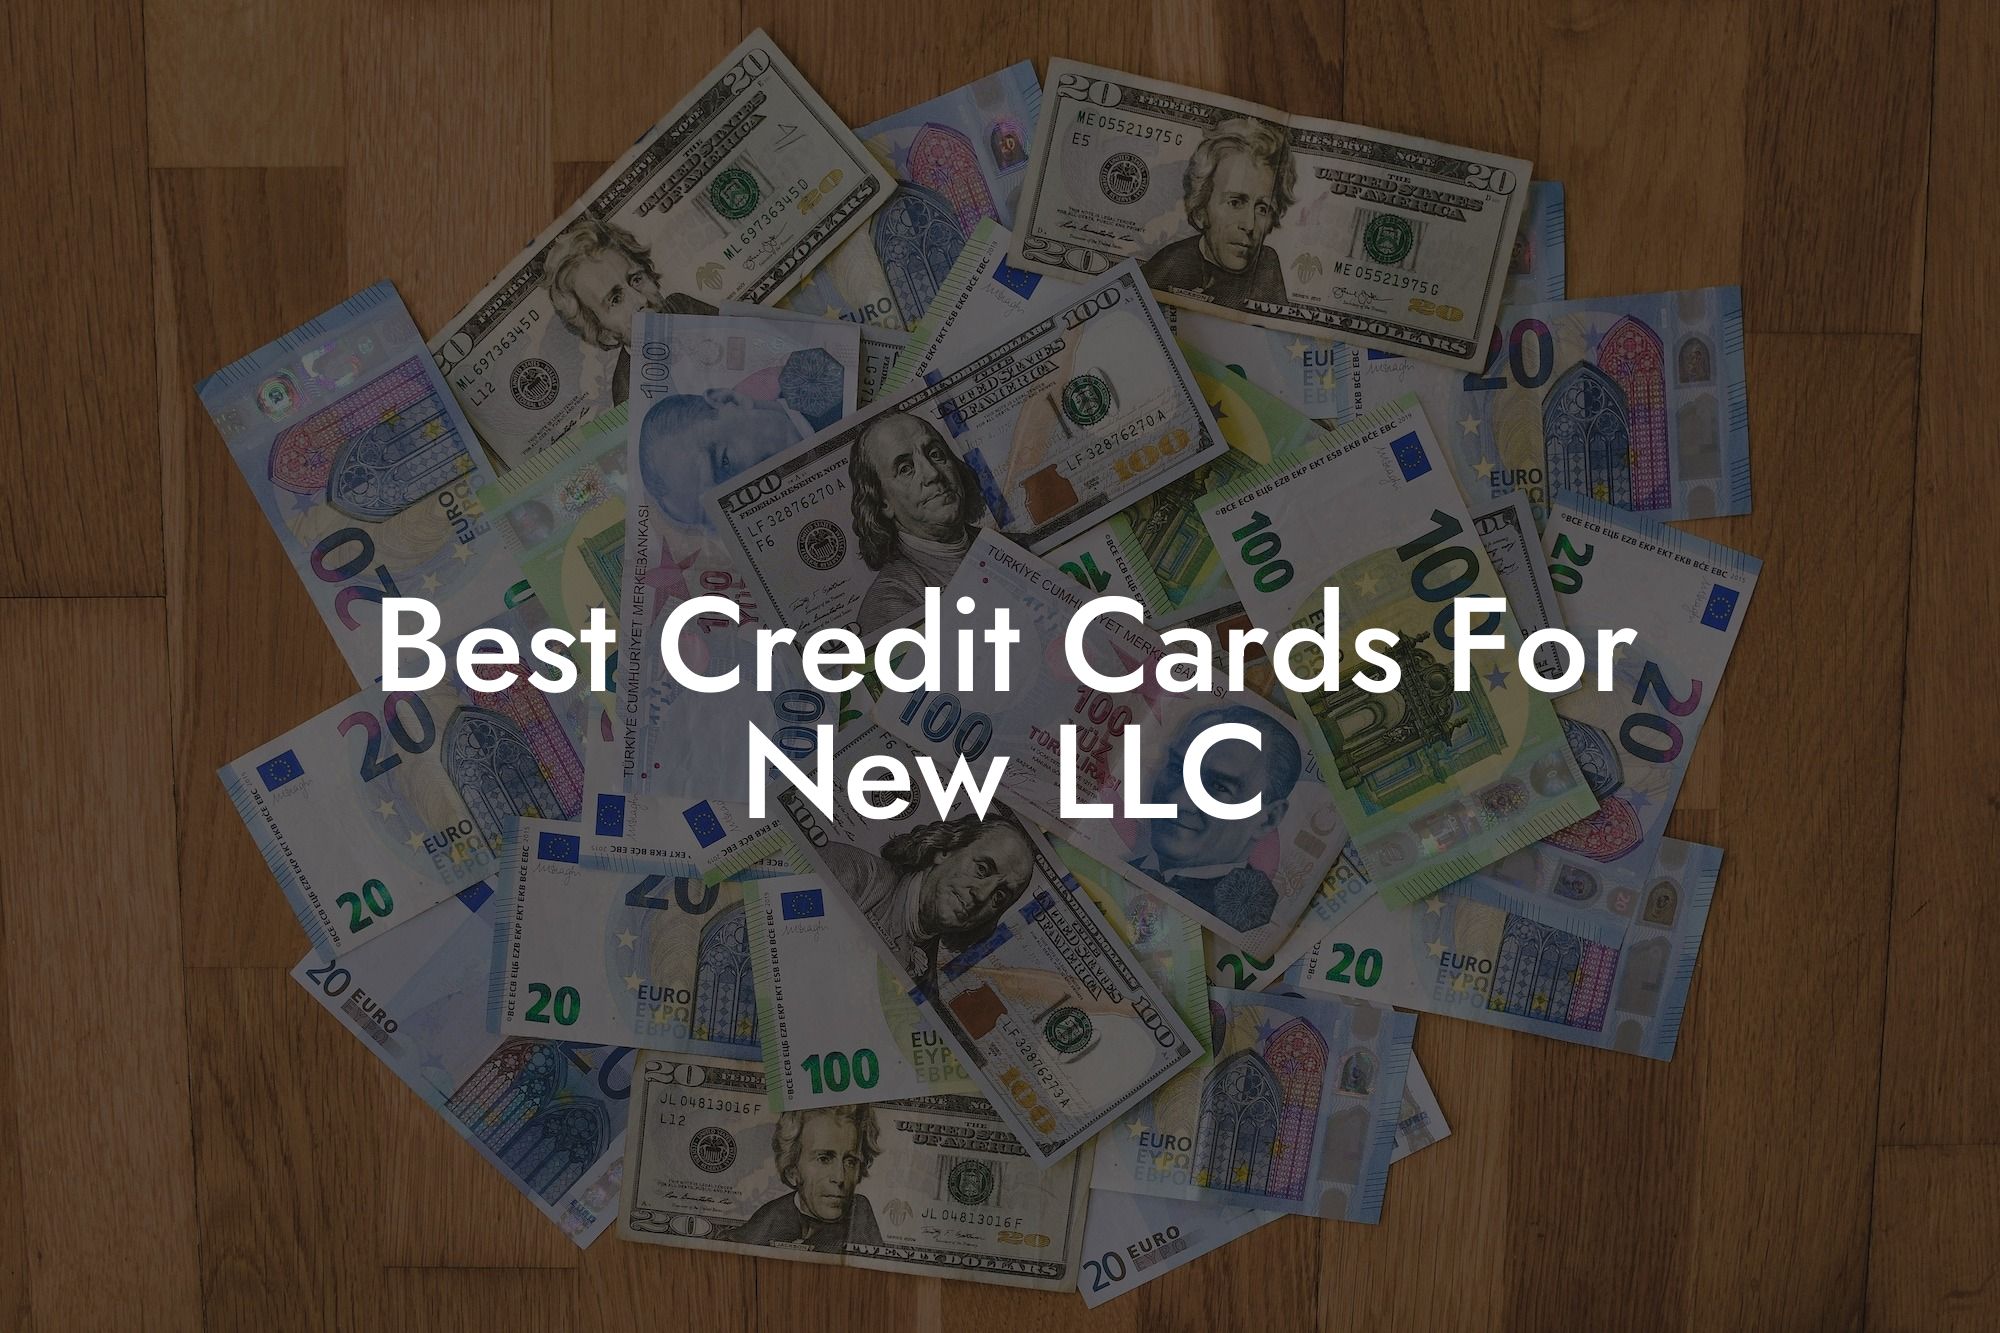 Best Credit Cards For New LLC